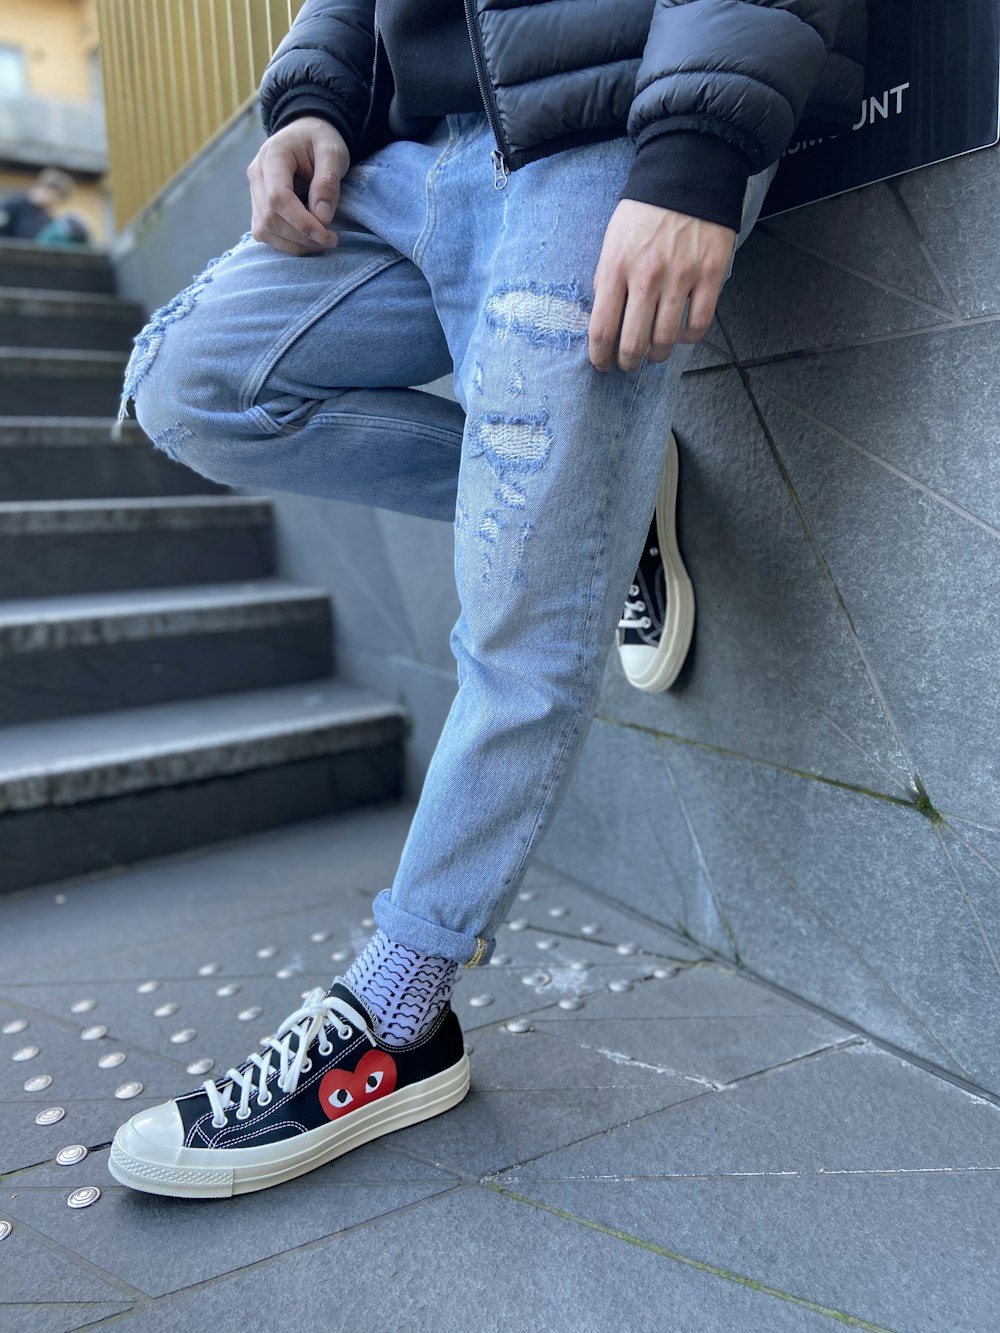 Person in blue denim jeans and black and white converse all star high top  sneakers photo – Free London Image on Unsplash